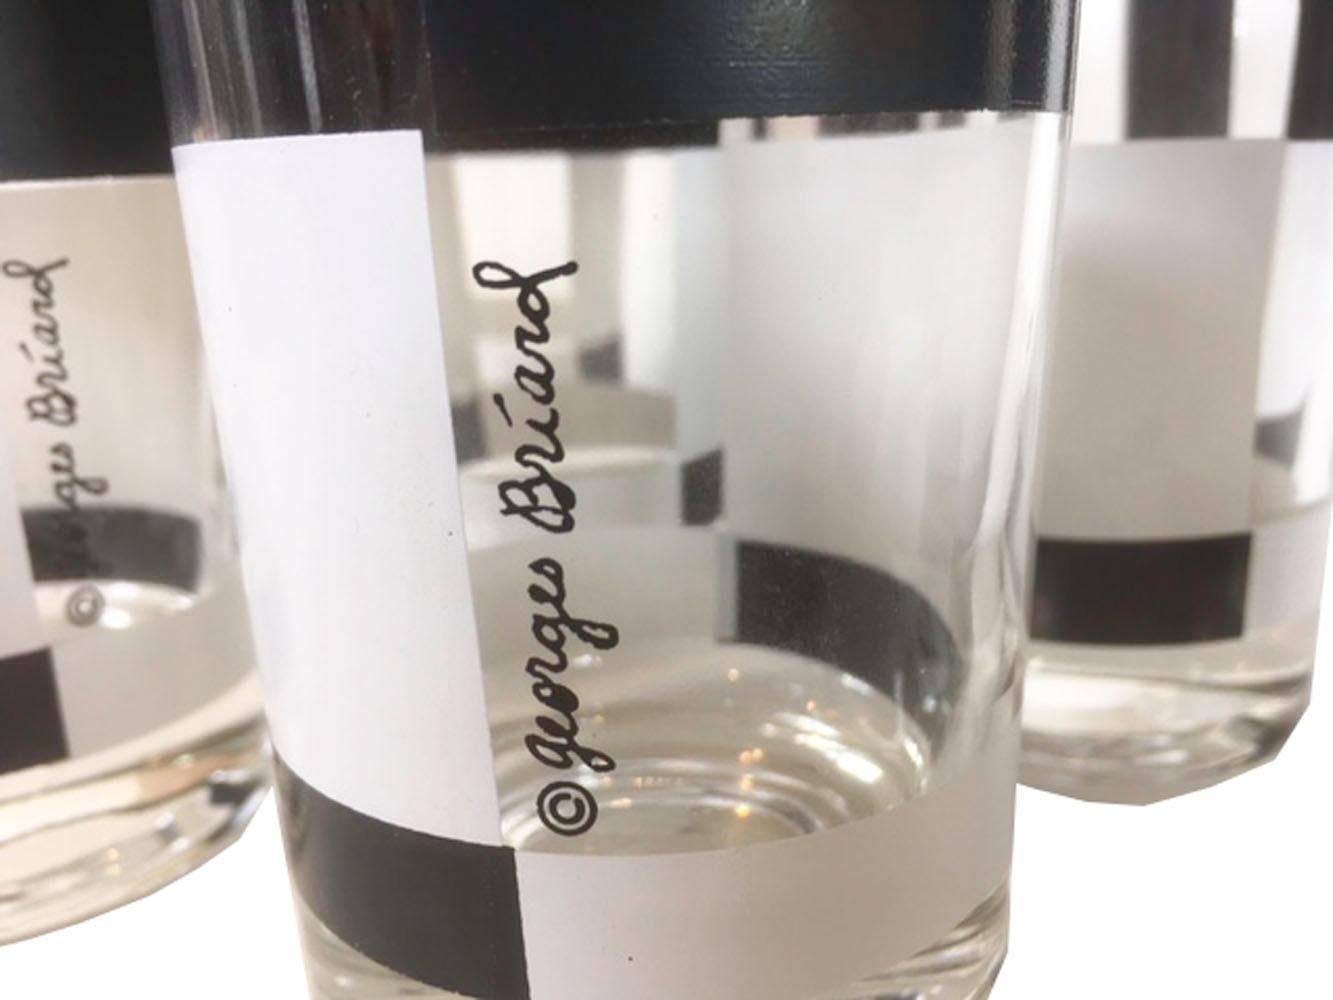 Eight signed Georges Briard highball glasses. In black and white Op-Art pattern having alternating black, white and clear squares. This pattern was from his January 1969 catalogue.